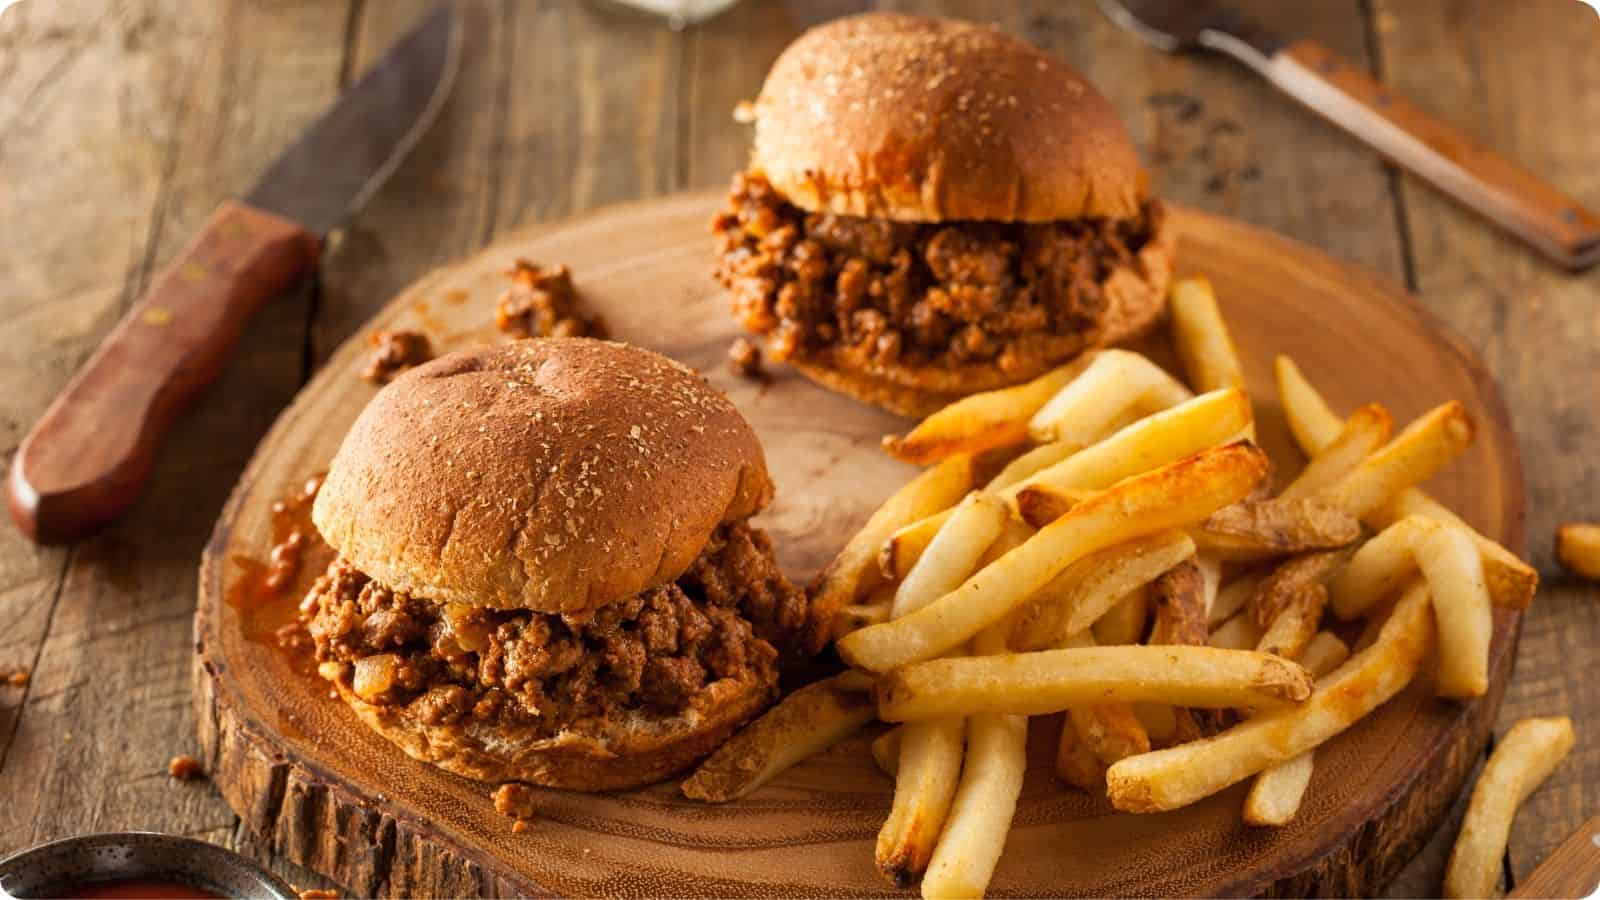 Sloppy Joes resting on a chopping board atop a wooden table, accompanied by a side of fries.⁣